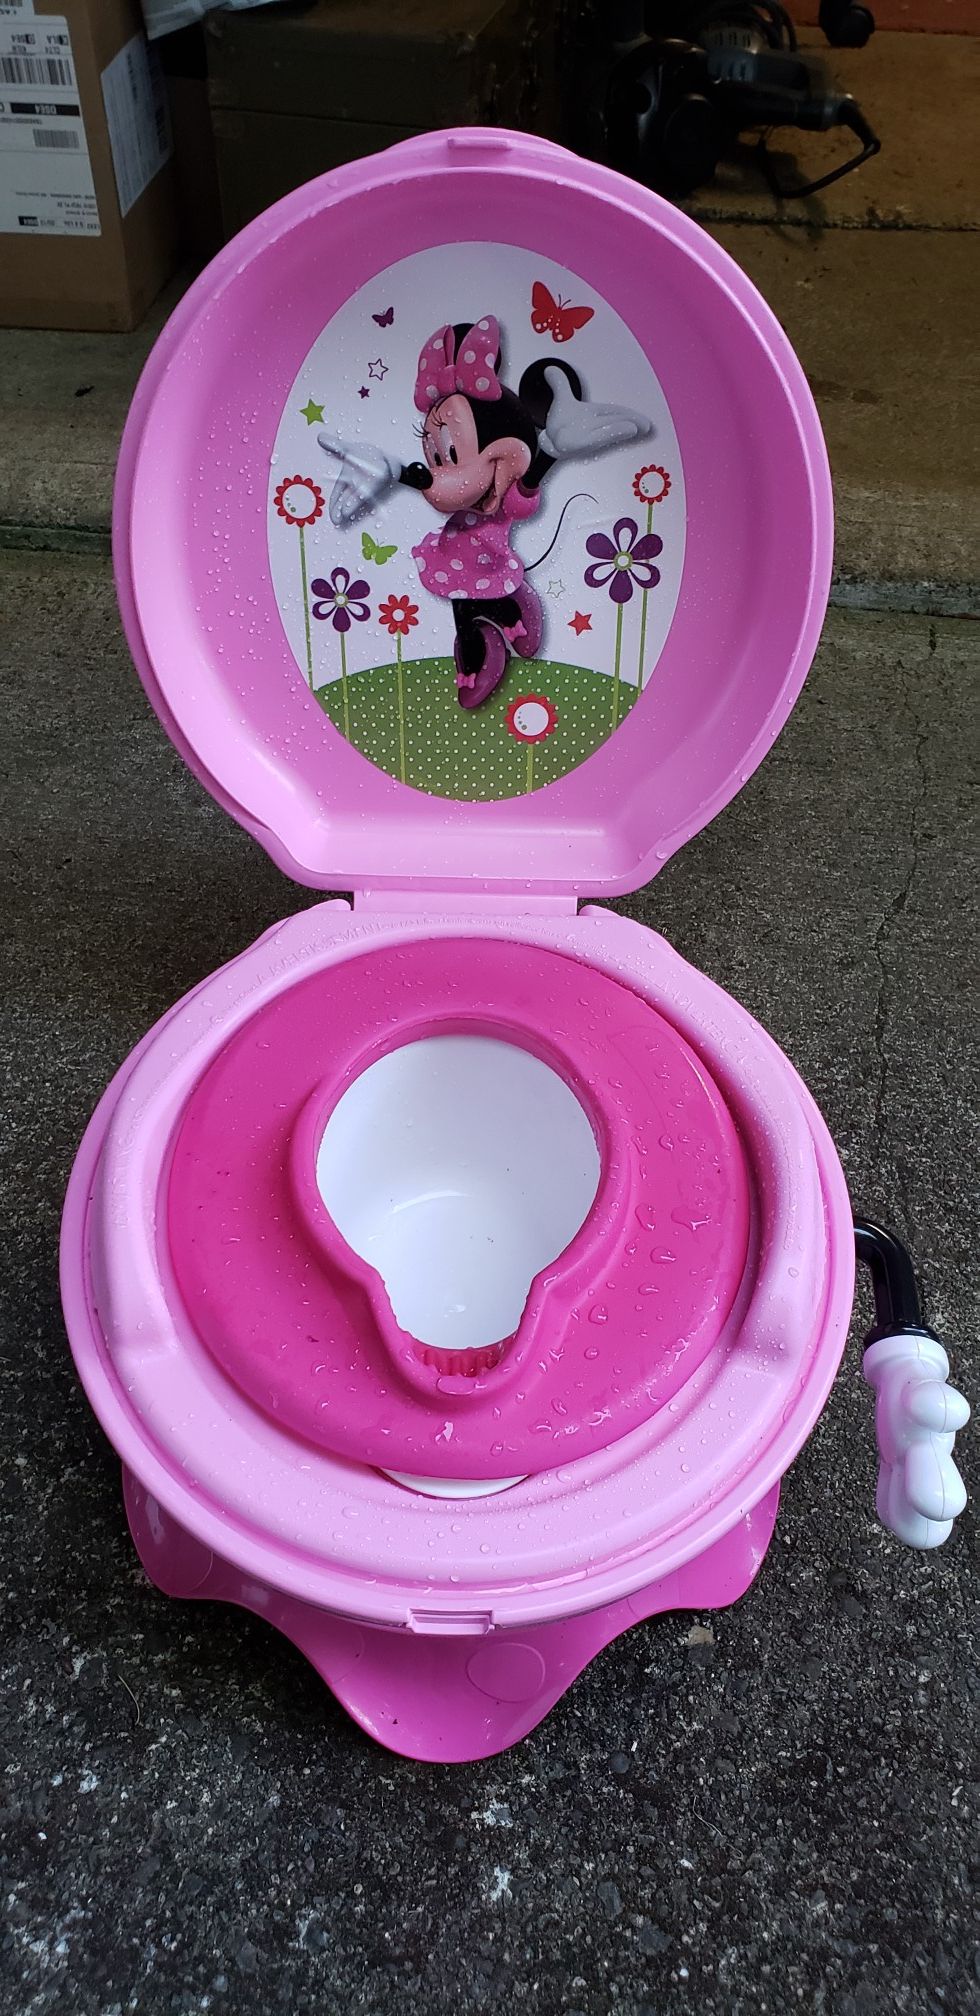 Baby's first toilet/child potty